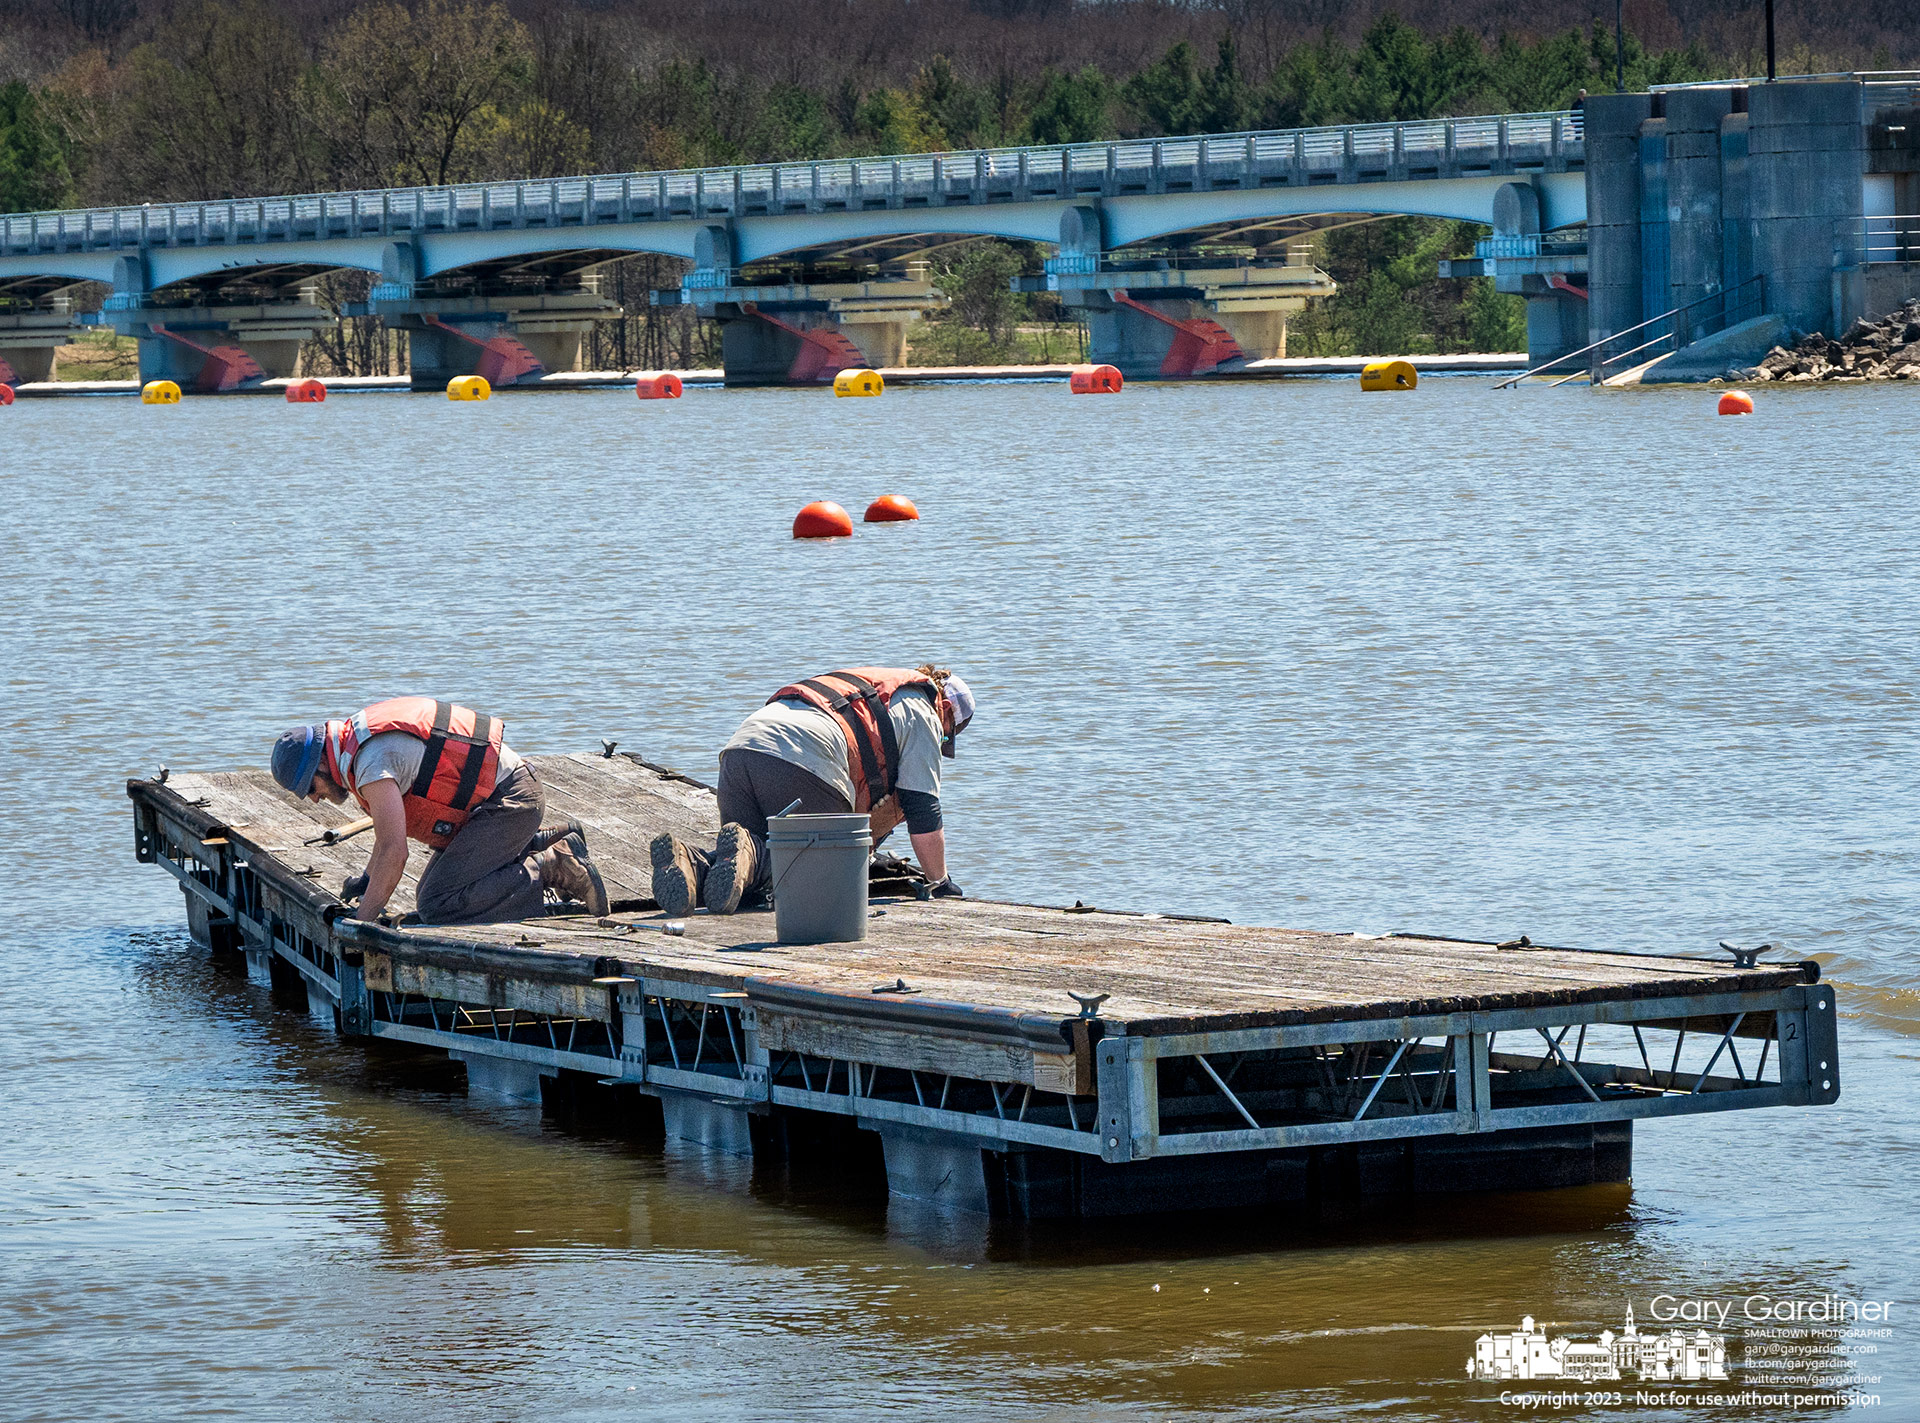 Columbus Parks workers connect two sections of docks before moving them into position to create a small boat harbor just north of the Hoover Reservoir Dam marking one of the signs of Spring. My Final Photo for April 12, 2023.